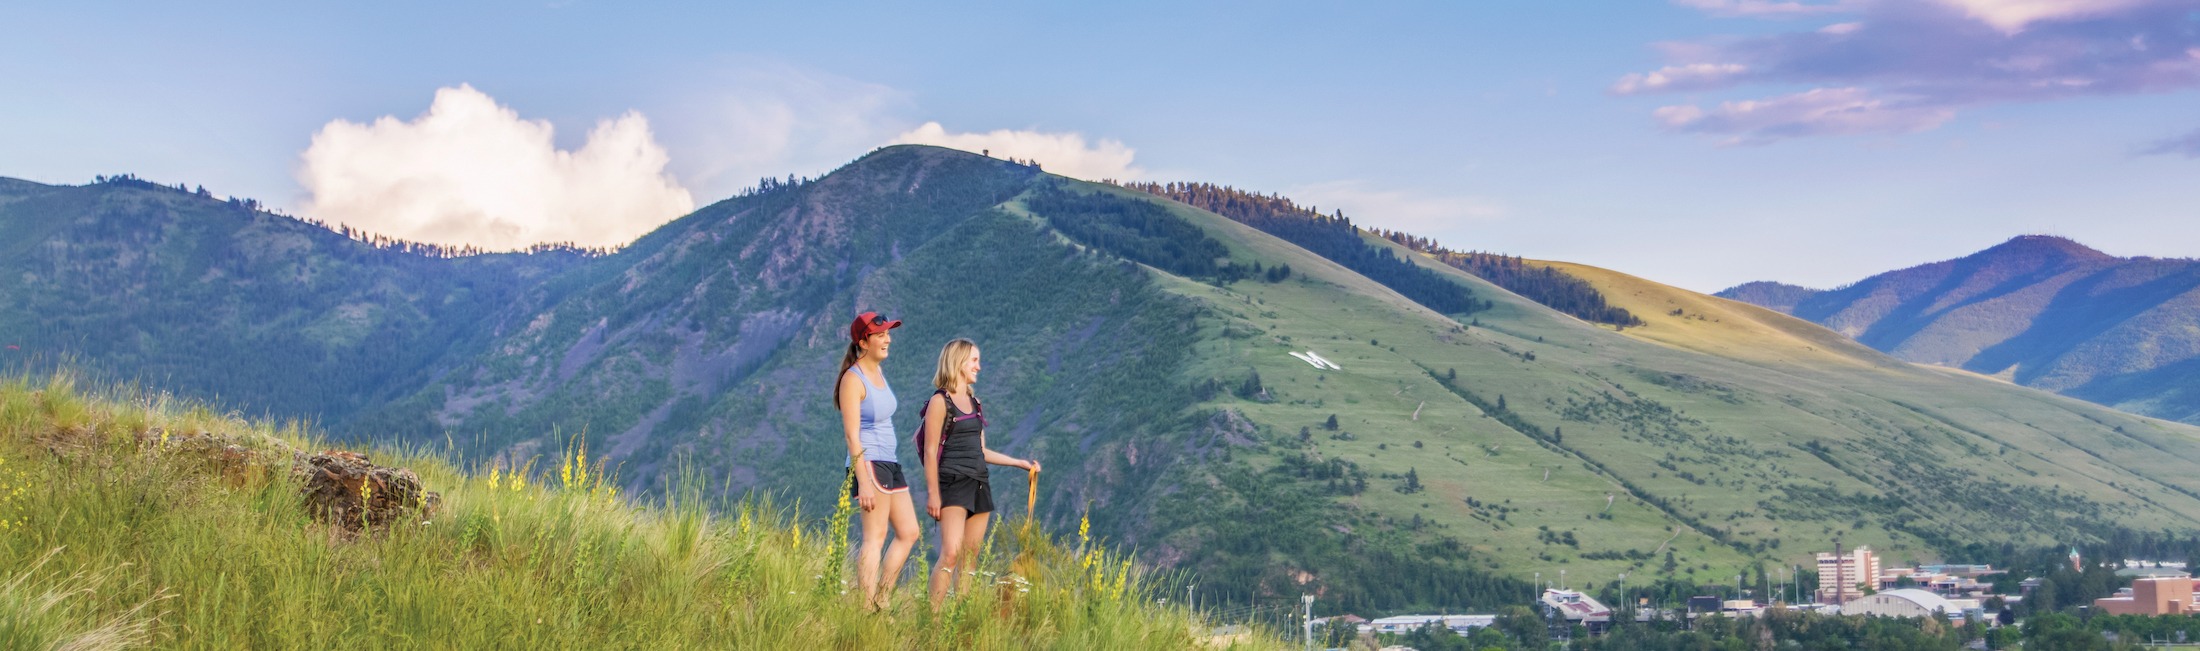 These Photos of Missoula Will Give You Major Spring Fever